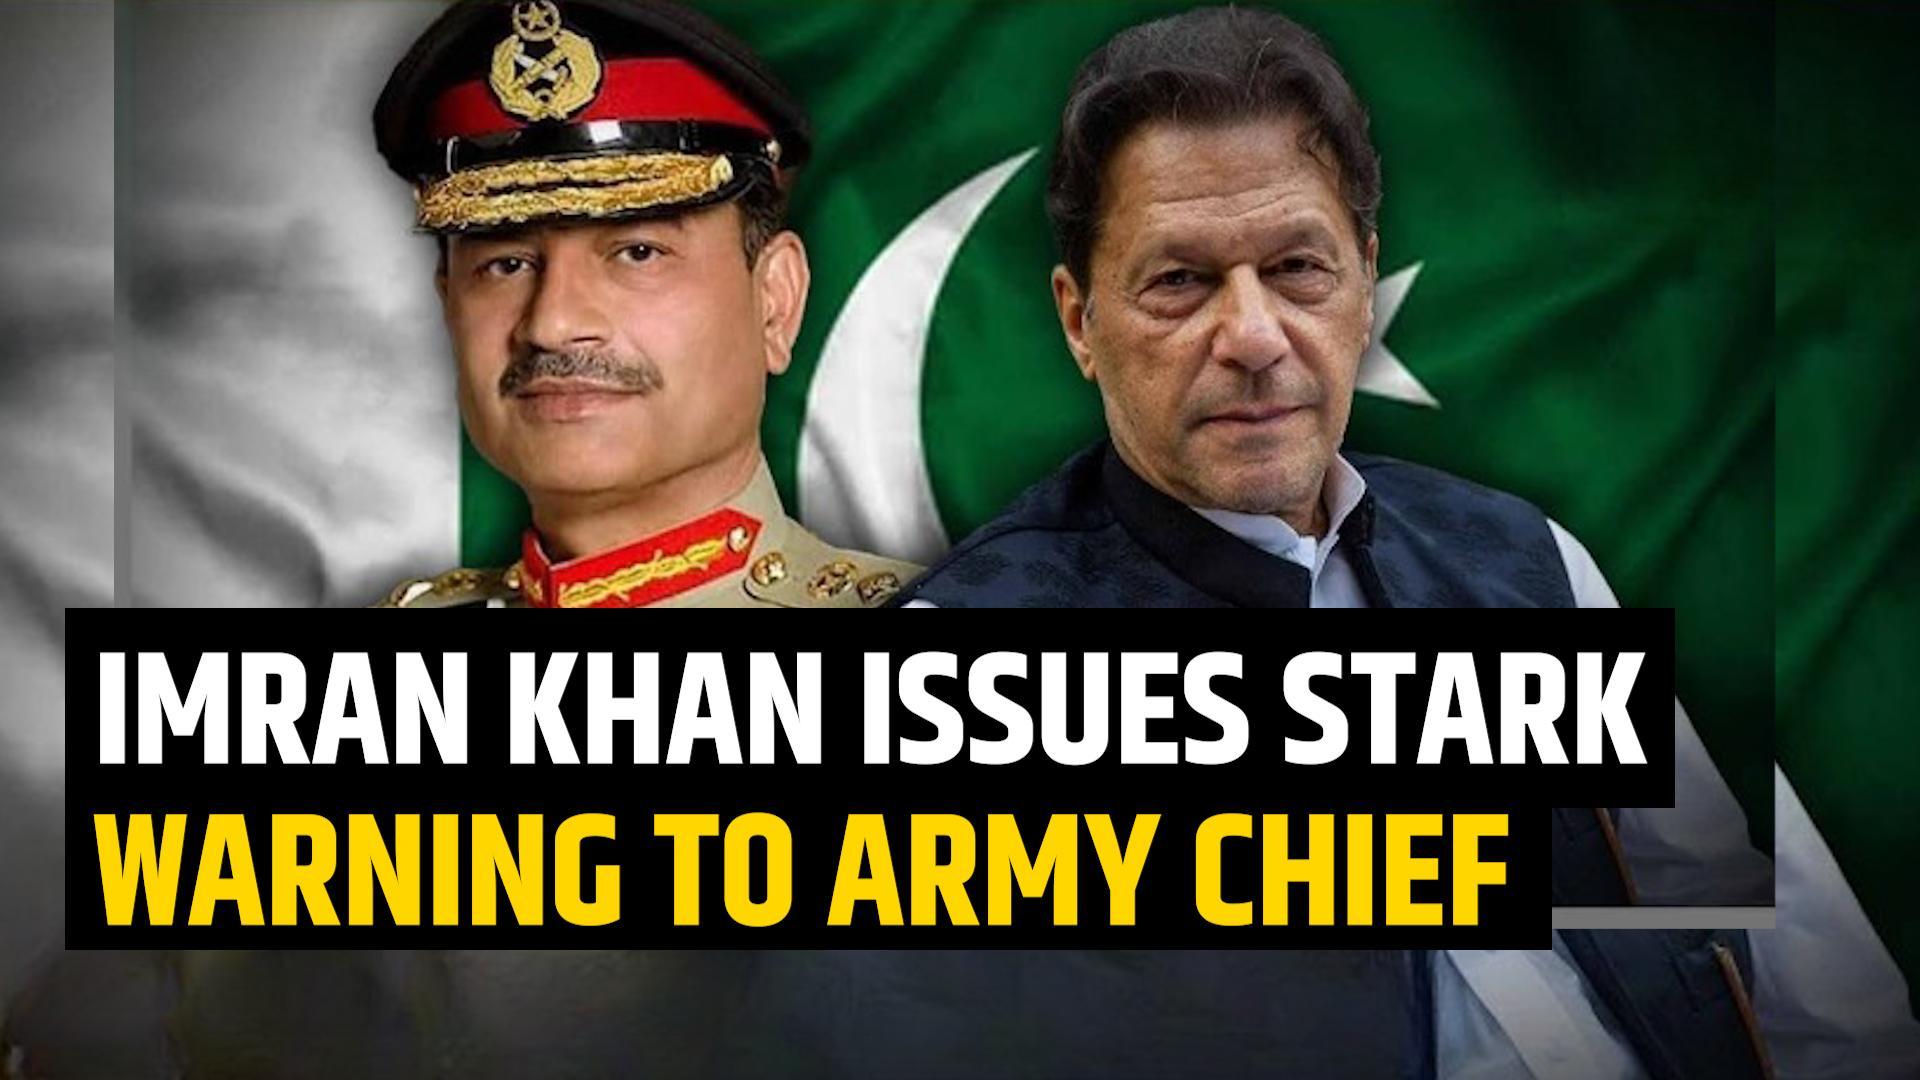 Imran Khan alleges direct involvement of Pakistan army chief in his wife's imprisonment